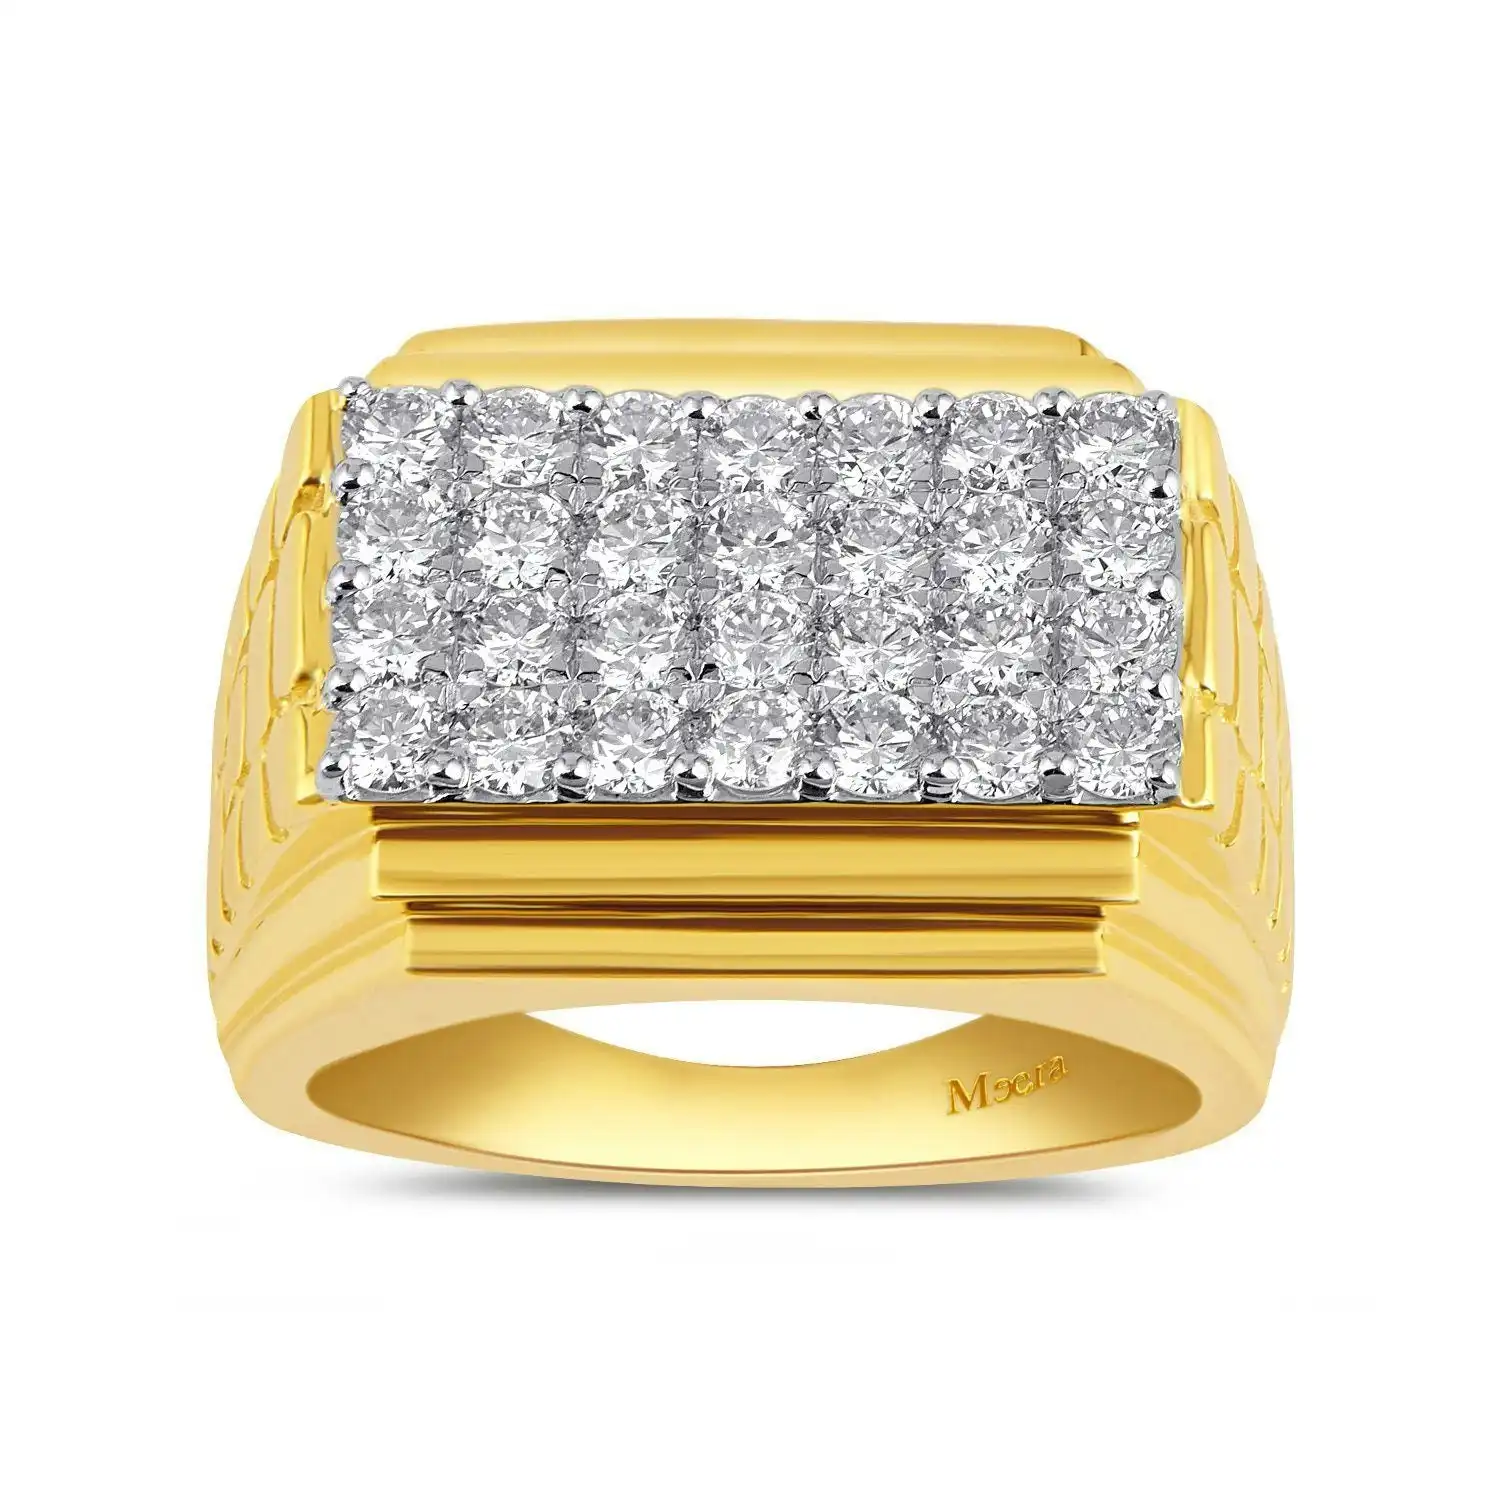 Meera Men's Ring with 2.00ct of Laboratory Grown Diamonds in 9ct Yellow Gold